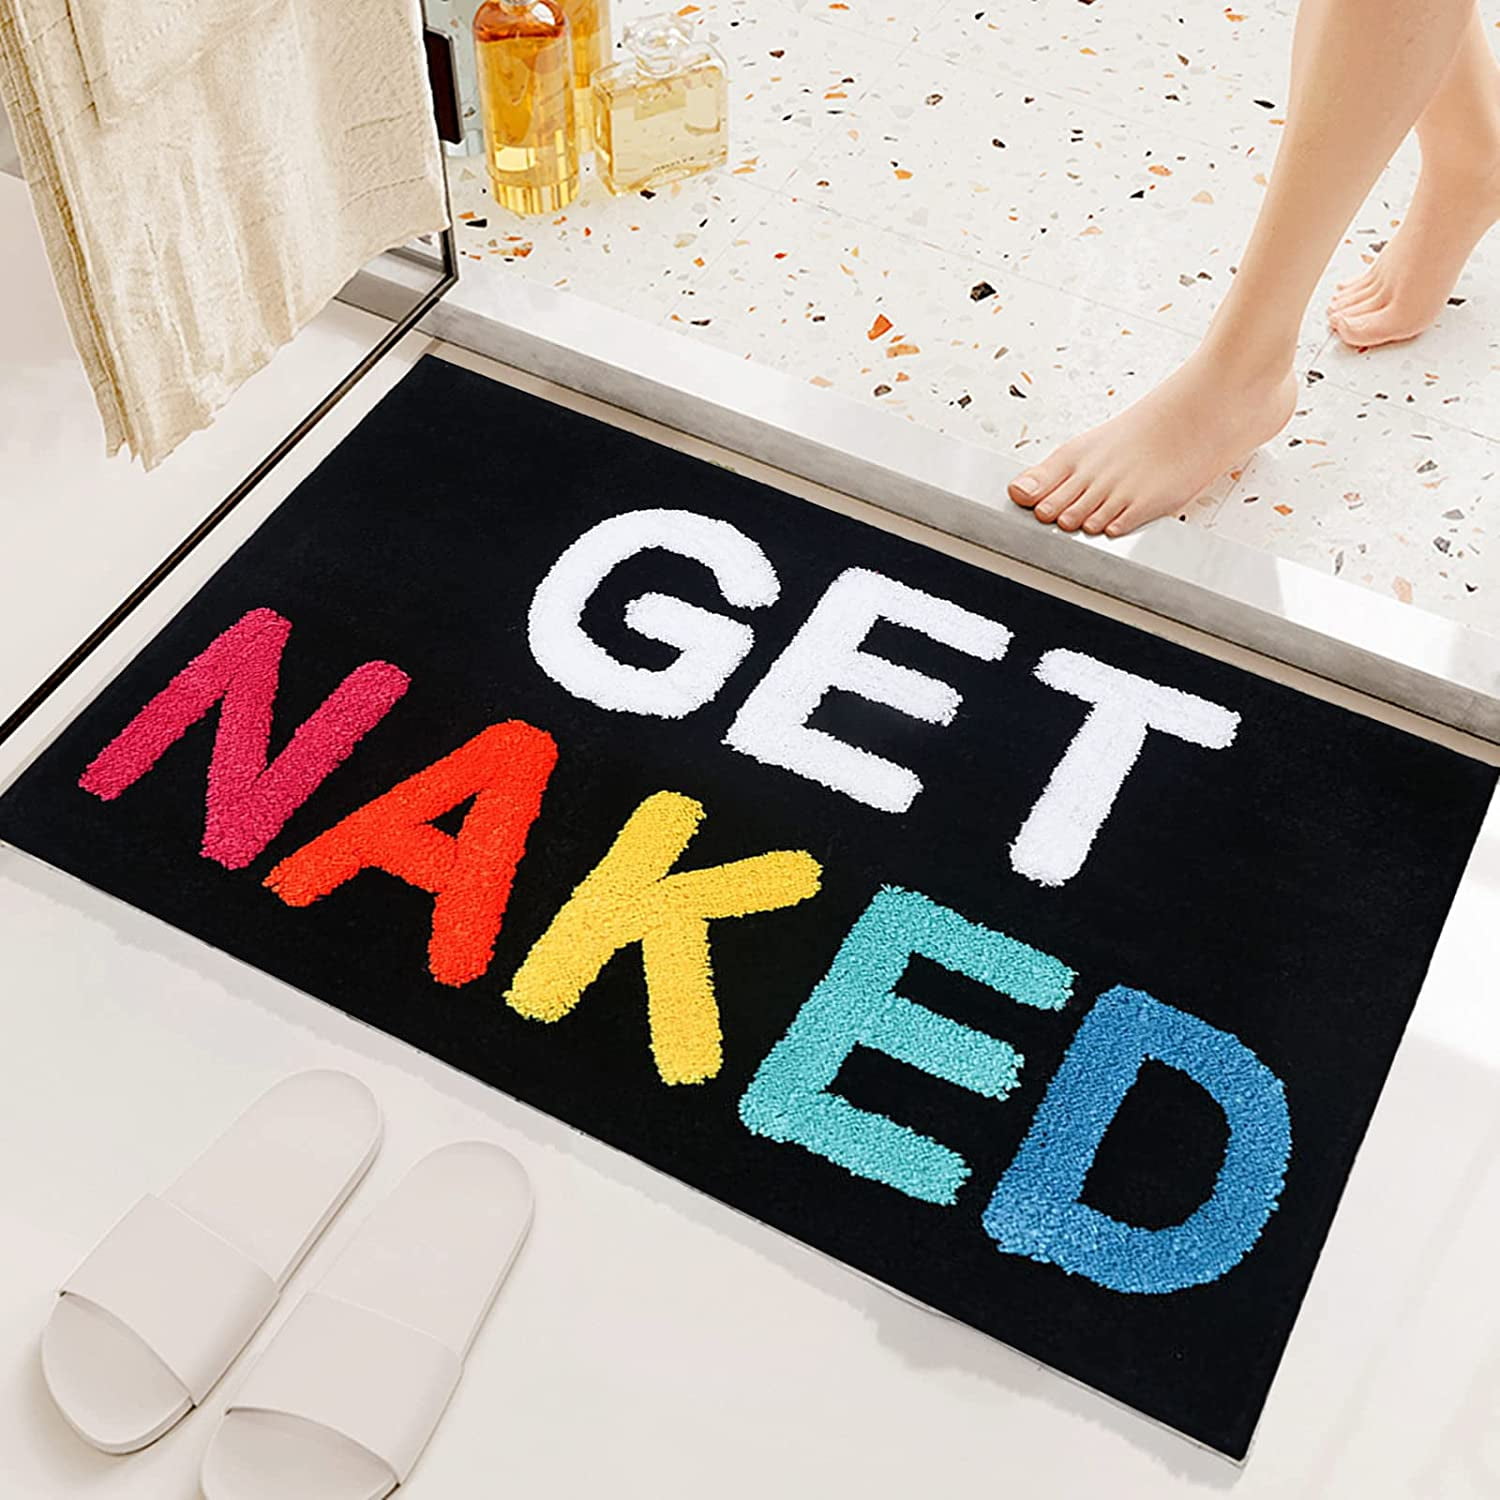 11 Funny Bath Mats Sure To Make You Smile Every Day - Clever Bath Mats